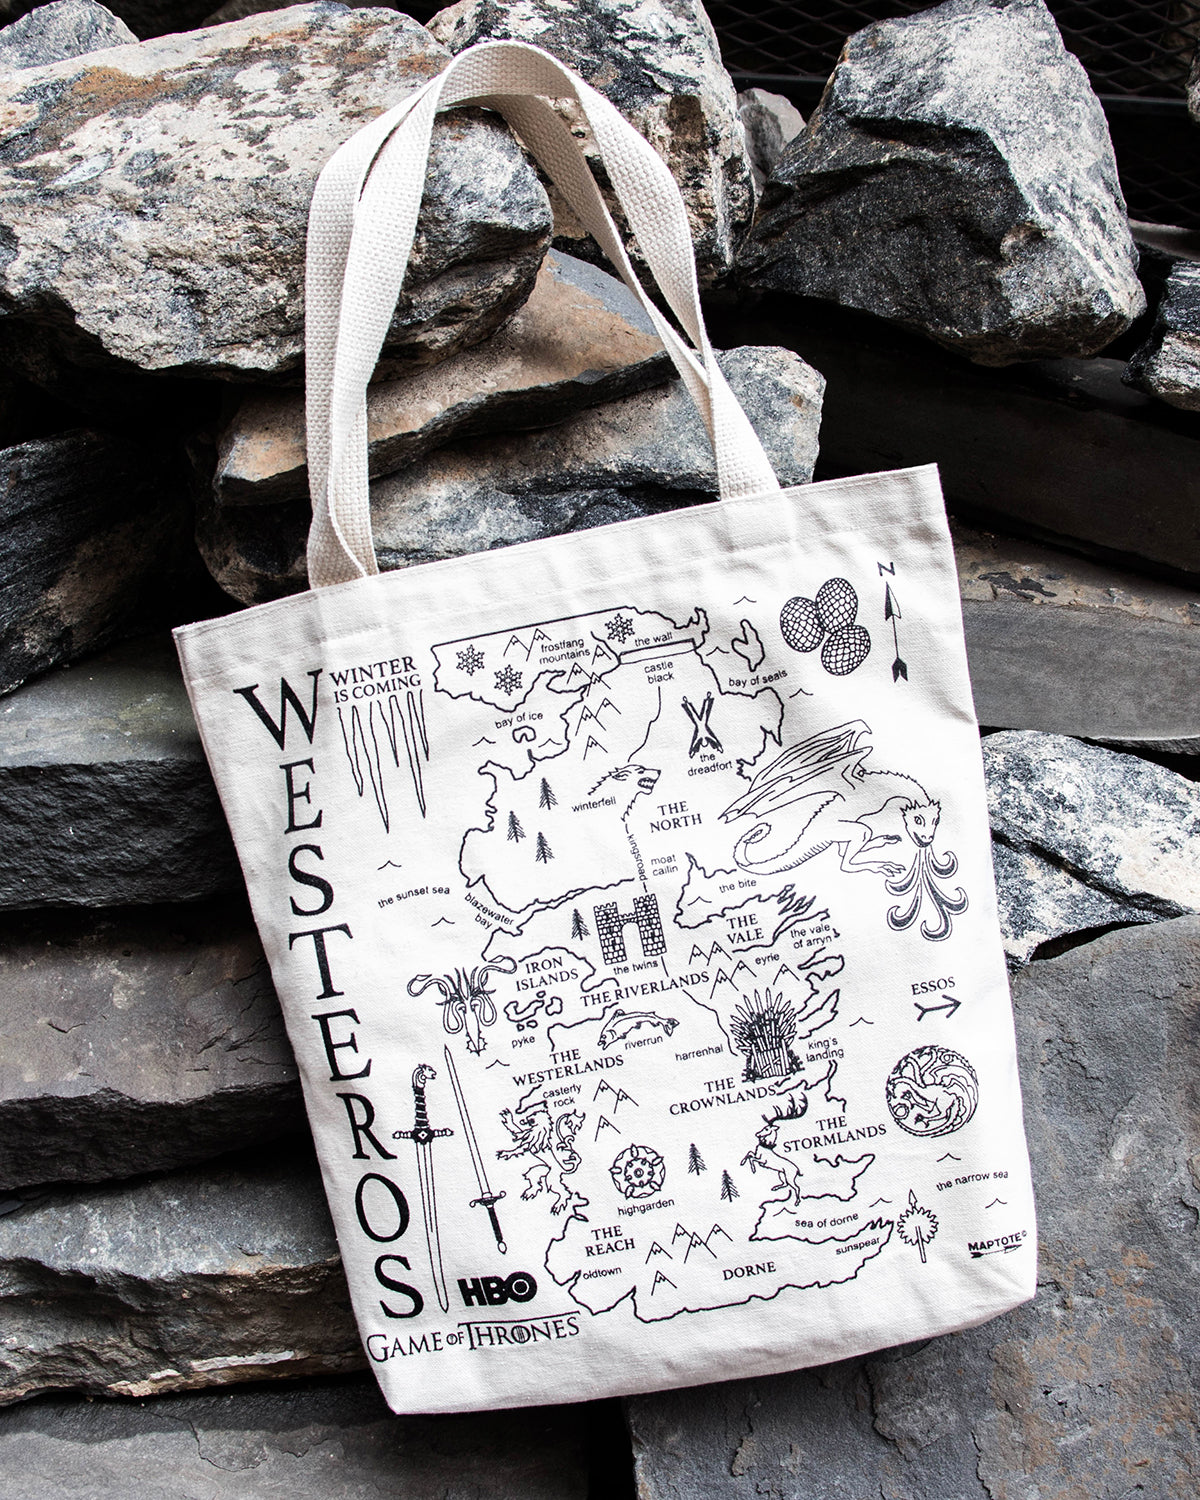 Westeros Tote for HBO's Game of Thrones!